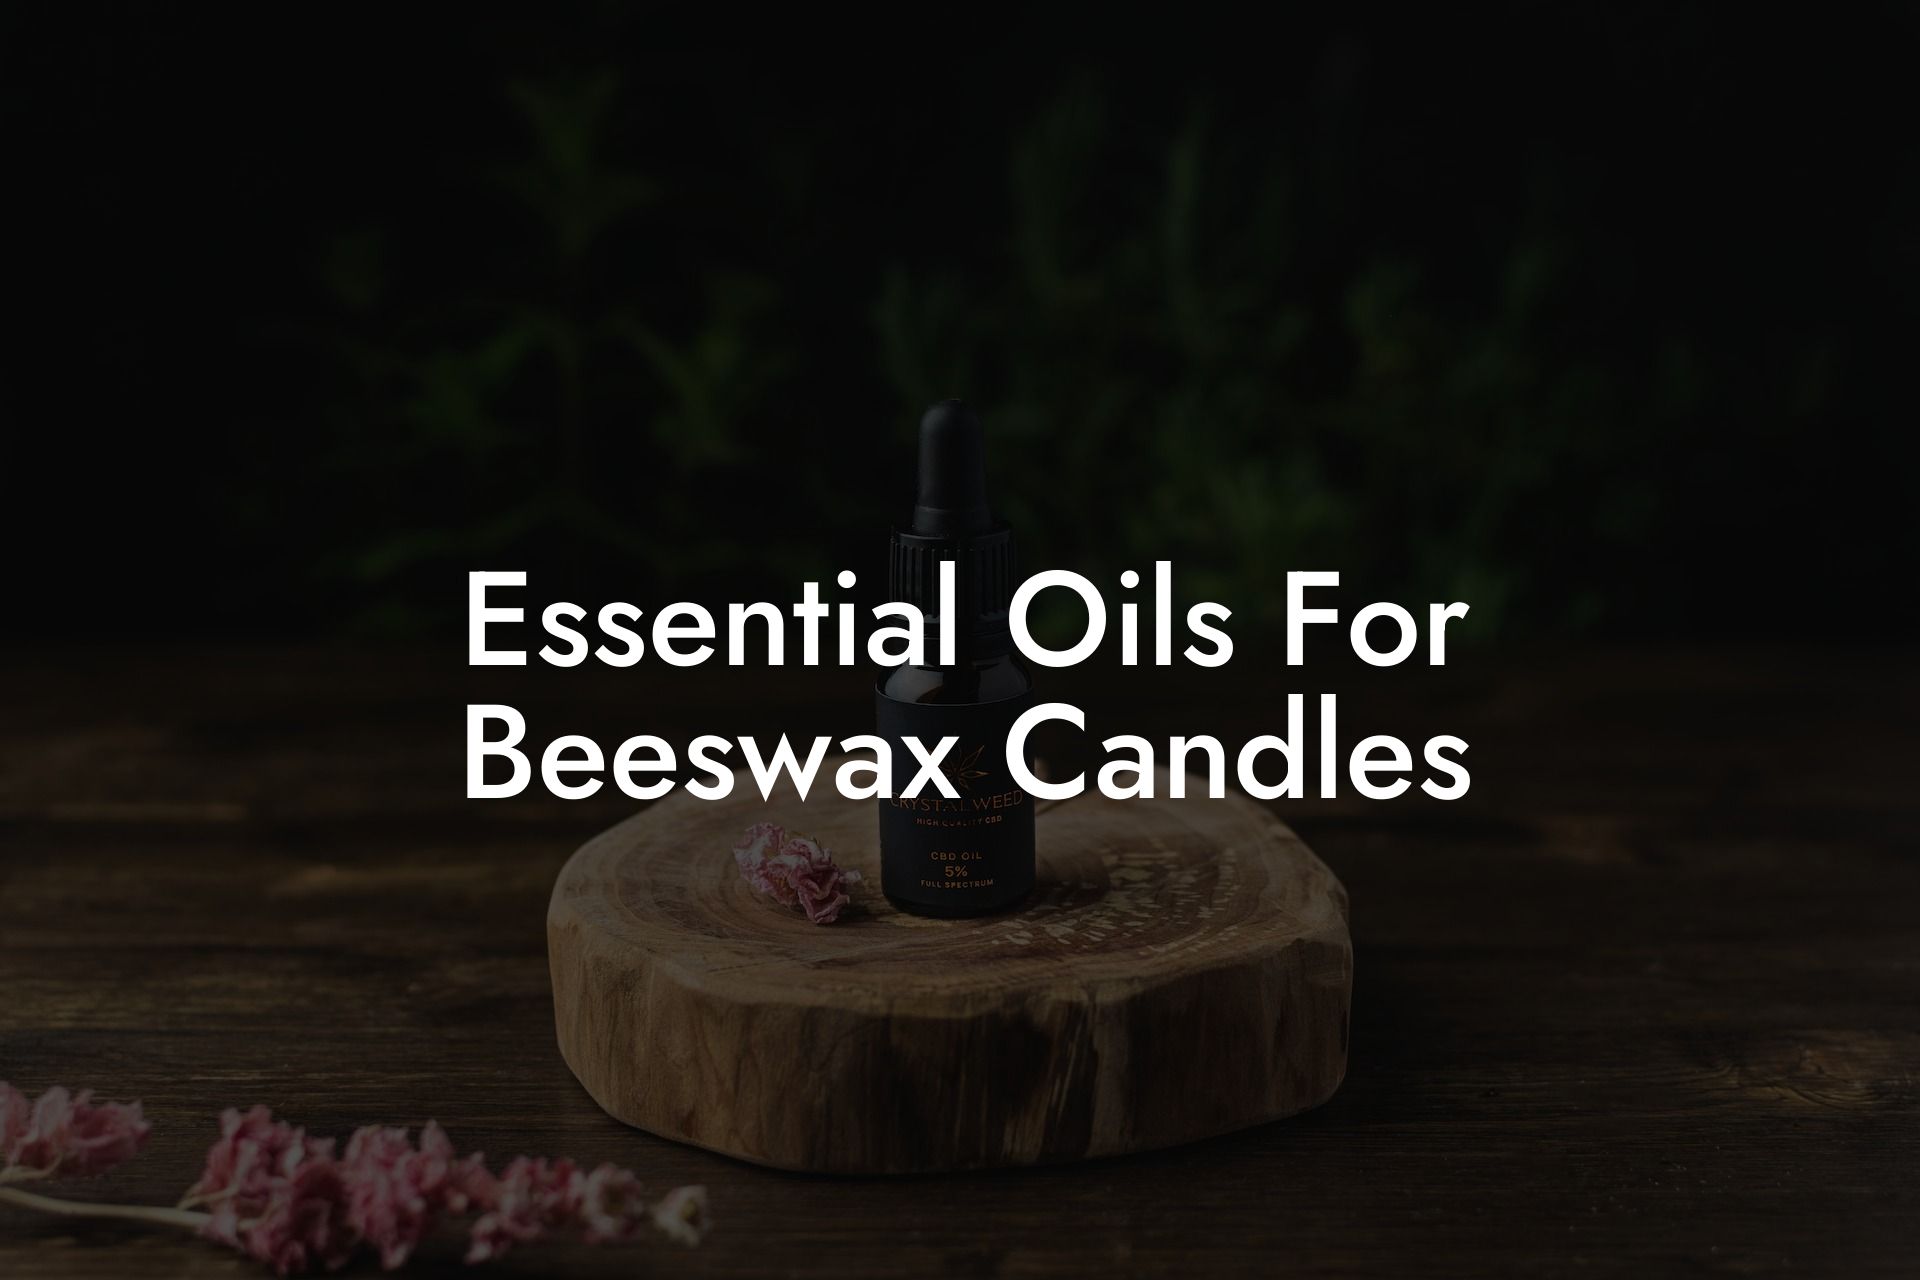 Essential Oils For Beeswax Candles